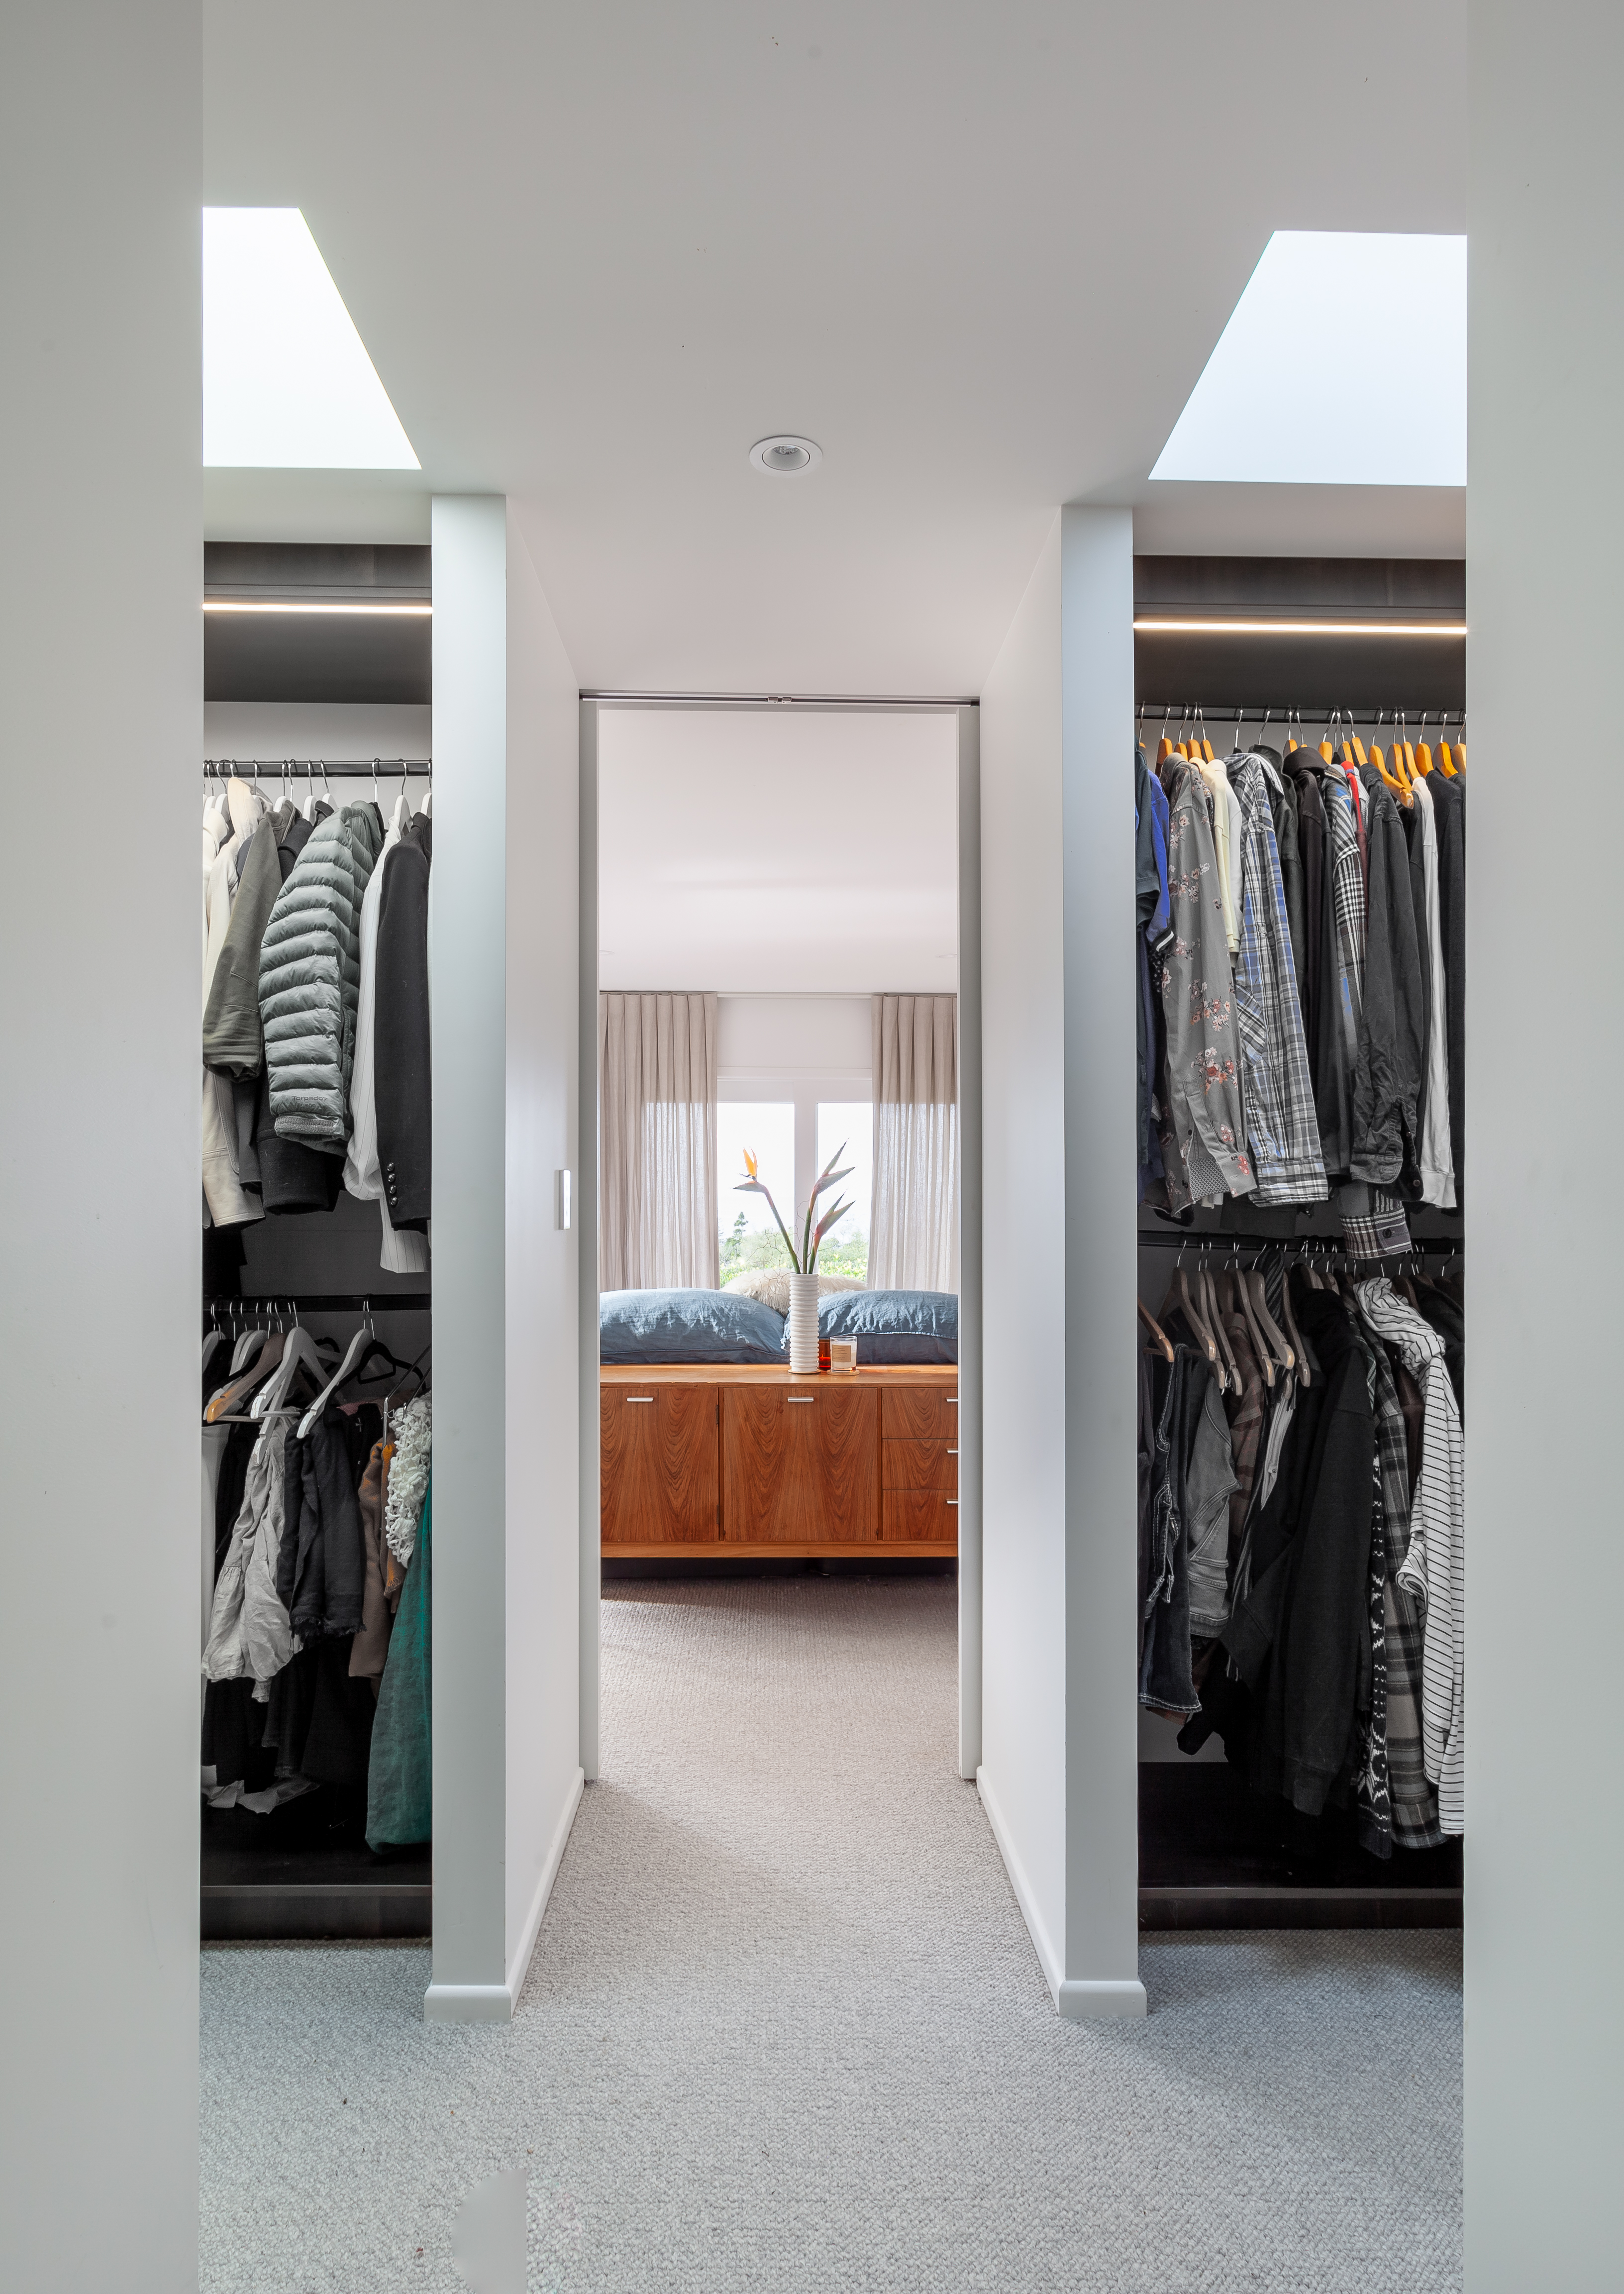 The image shows a modern, organized walk-in closet leading into a bright bedroom. On the left side of the closet, there are multiple grey-toned clothing items including shirts and jackets hung neatly. On the right side, various patterned and colored clothing items are displayed. The walls of the closet are white, creating a clean and minimalist look. The floor is covered with a light grey carpet that extends from the closet into the bedroom. In the background through an open doorway, part of a bedroom is visible featuring a large bed with two pillows and wooden detailing at its base. A window in the bedroom is partially visible; it is covered by light curtains allowing natural light to illuminate both rooms.